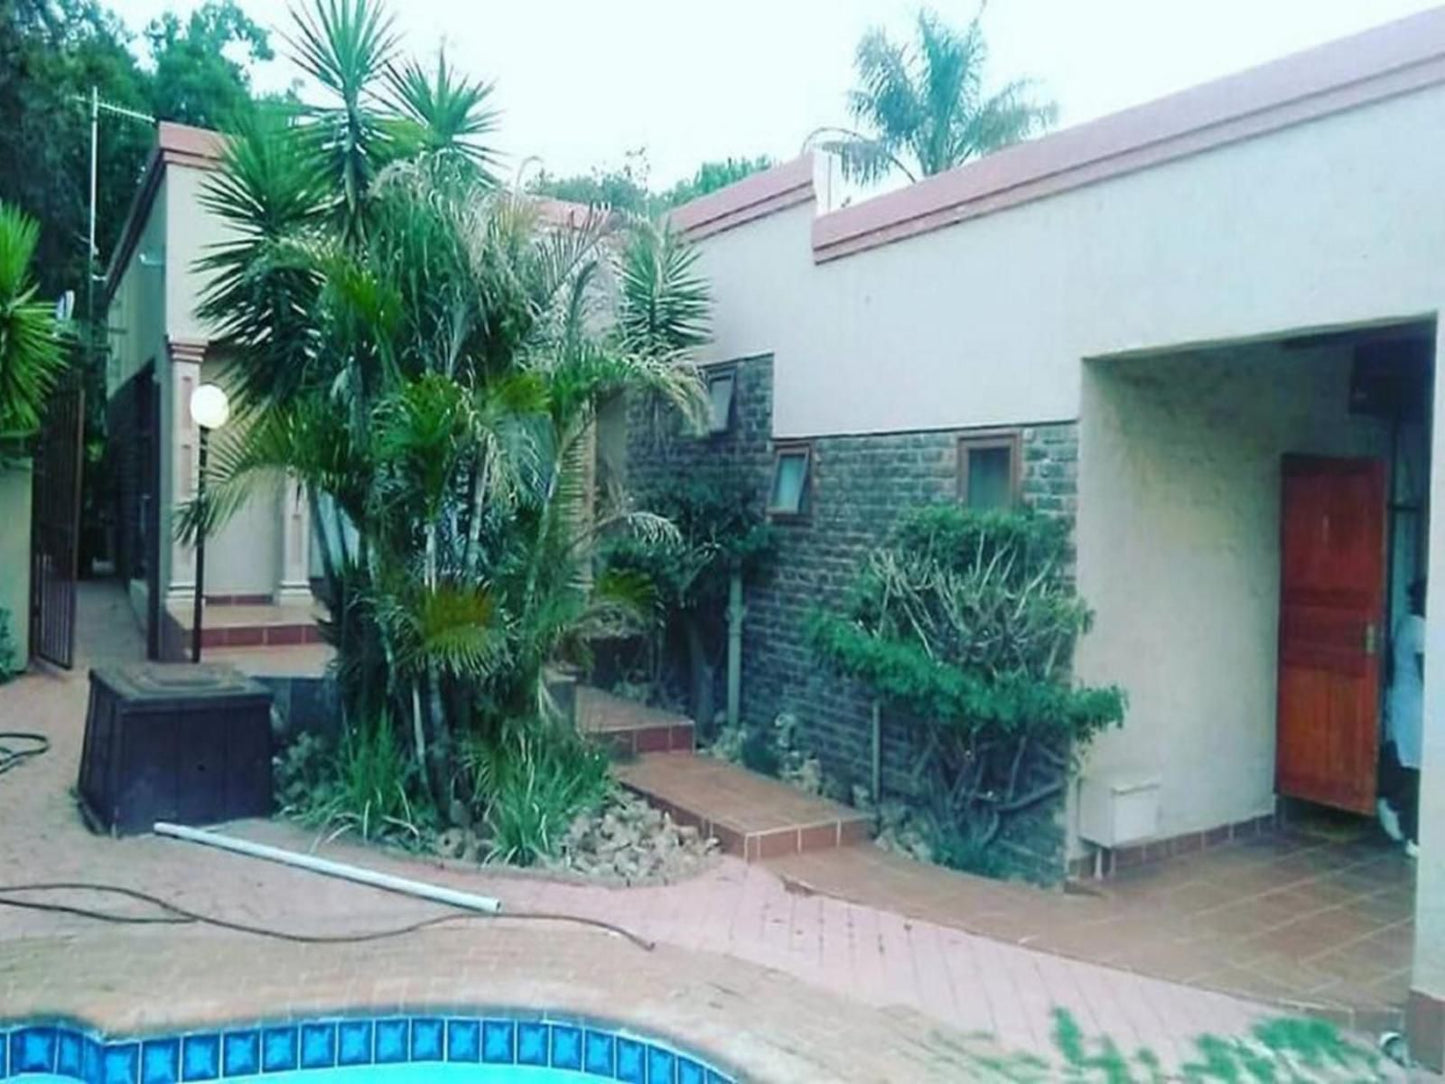 The Lion Fish Guest House Meyers Park Pretoria Tshwane Gauteng South Africa House, Building, Architecture, Palm Tree, Plant, Nature, Wood, Garden, Swimming Pool